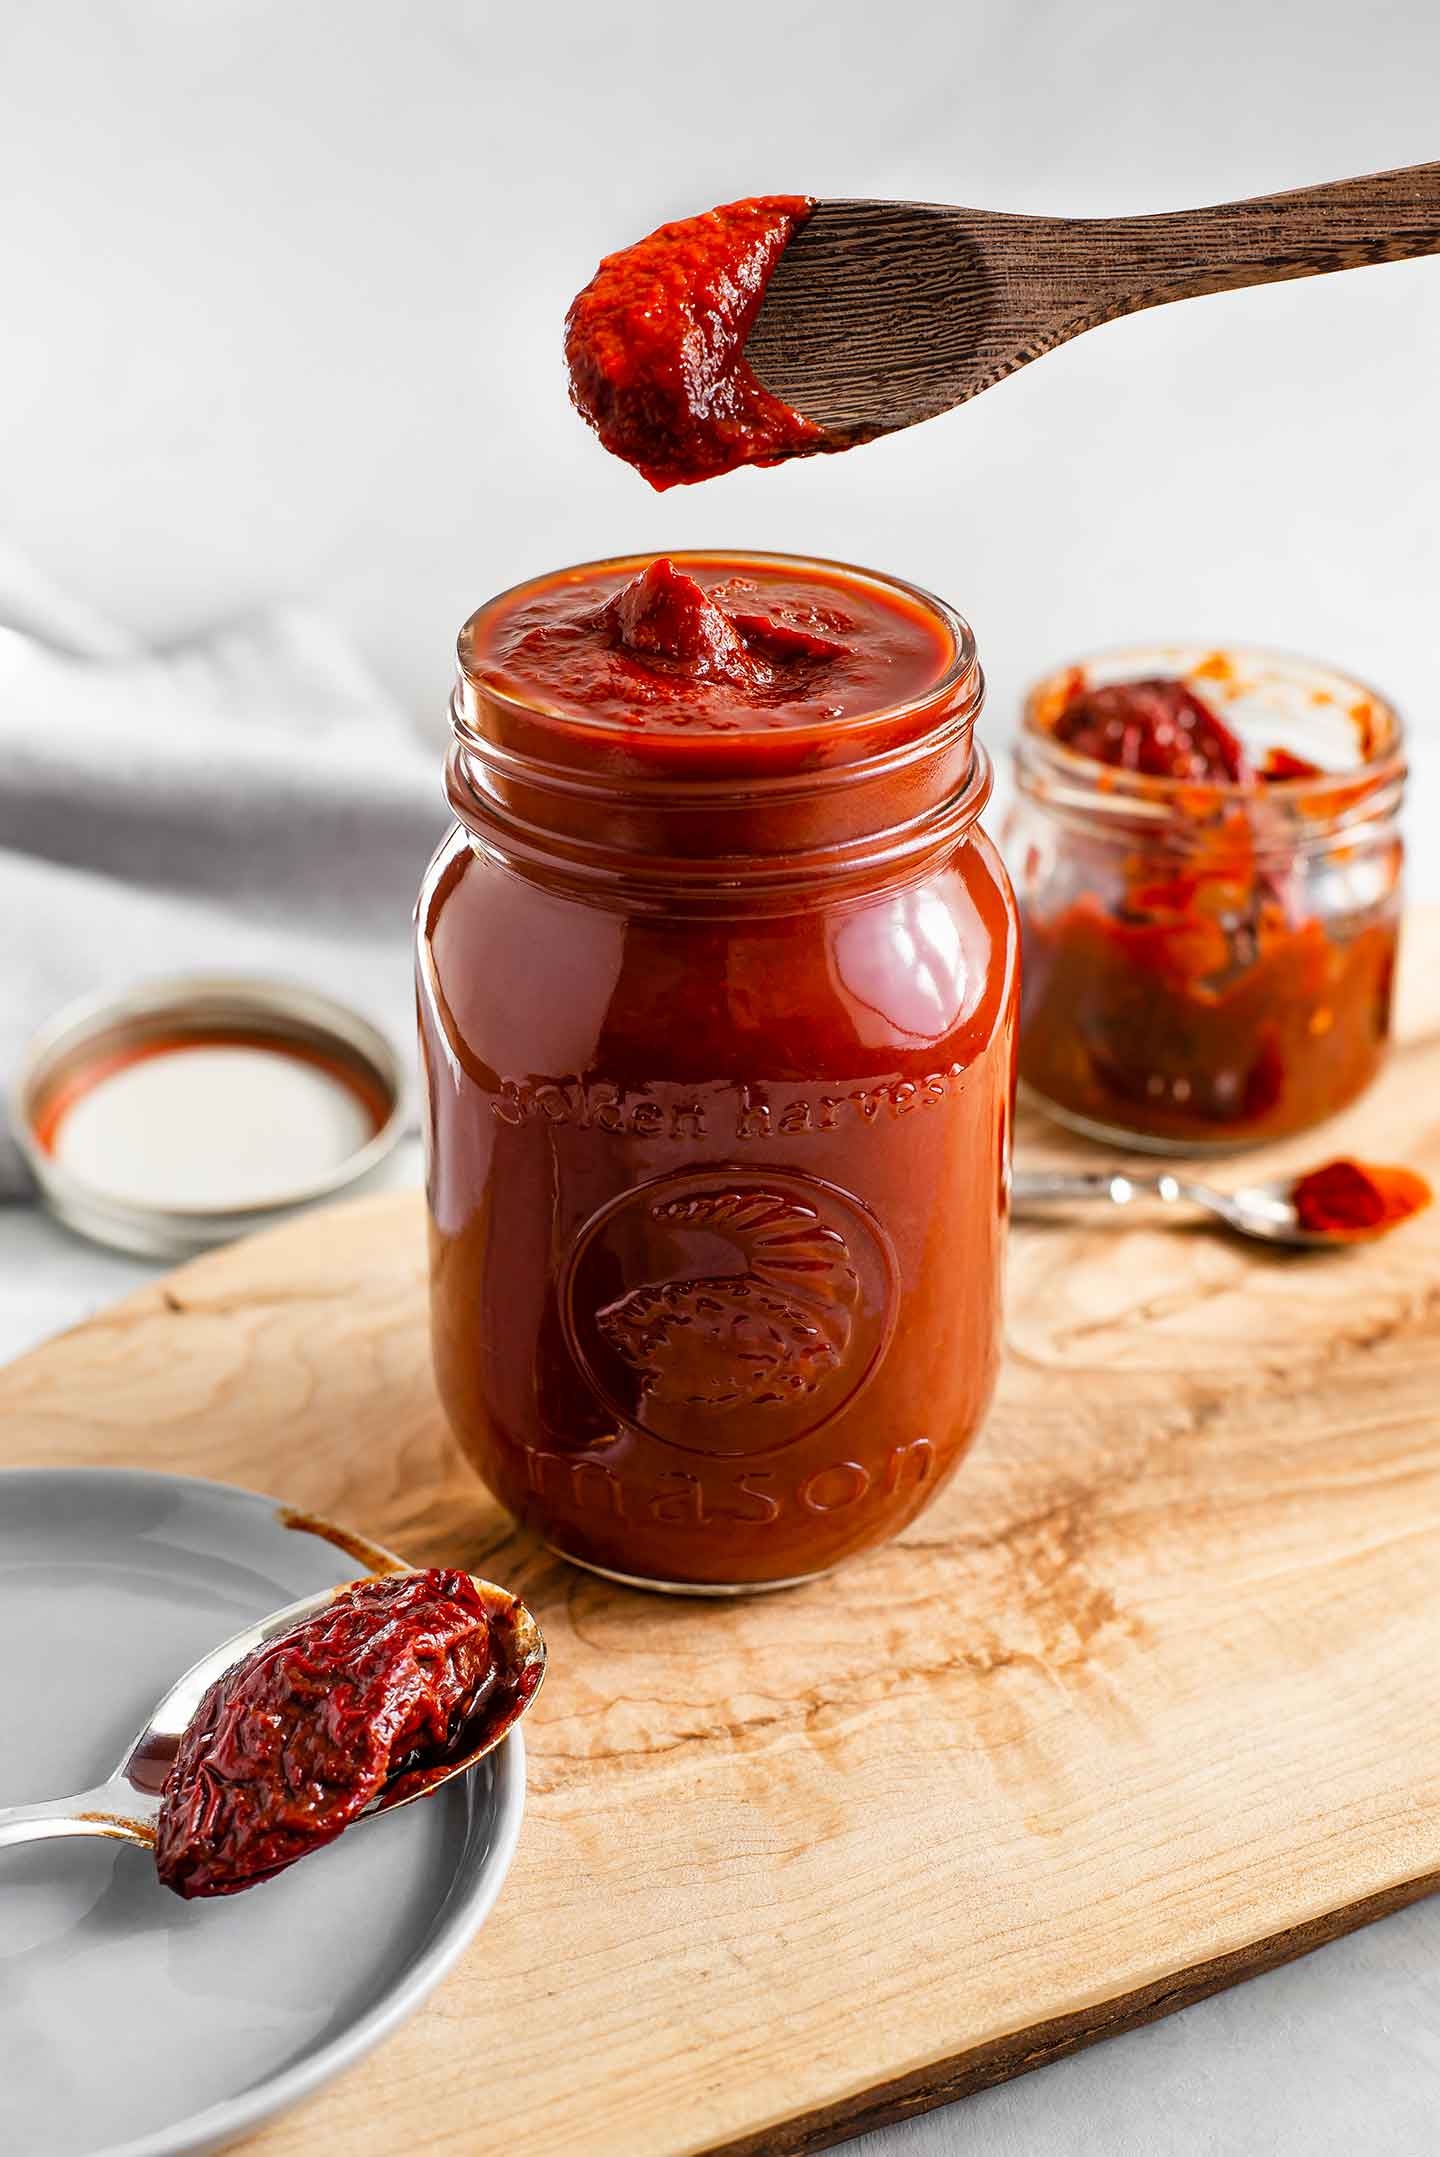 Side view of easy chipotle BBQ sauce filling a mason jar. A wooden spoon scoops the deep red, thick, and spicy sauce. Chipotle peppers in adobo sauce surround the jar.